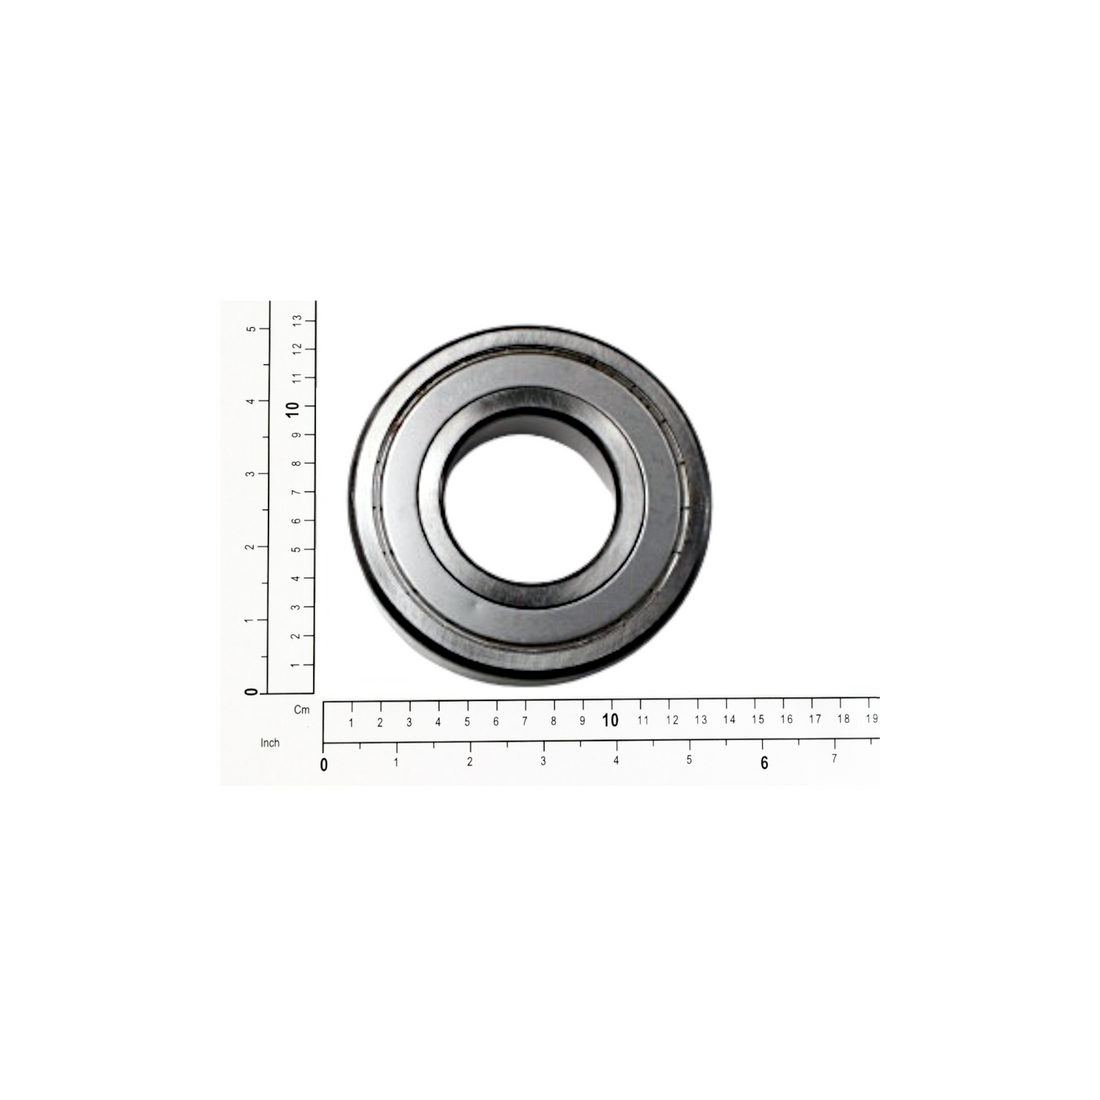 R&M Parts - Bearing, Part Number: 6300433121